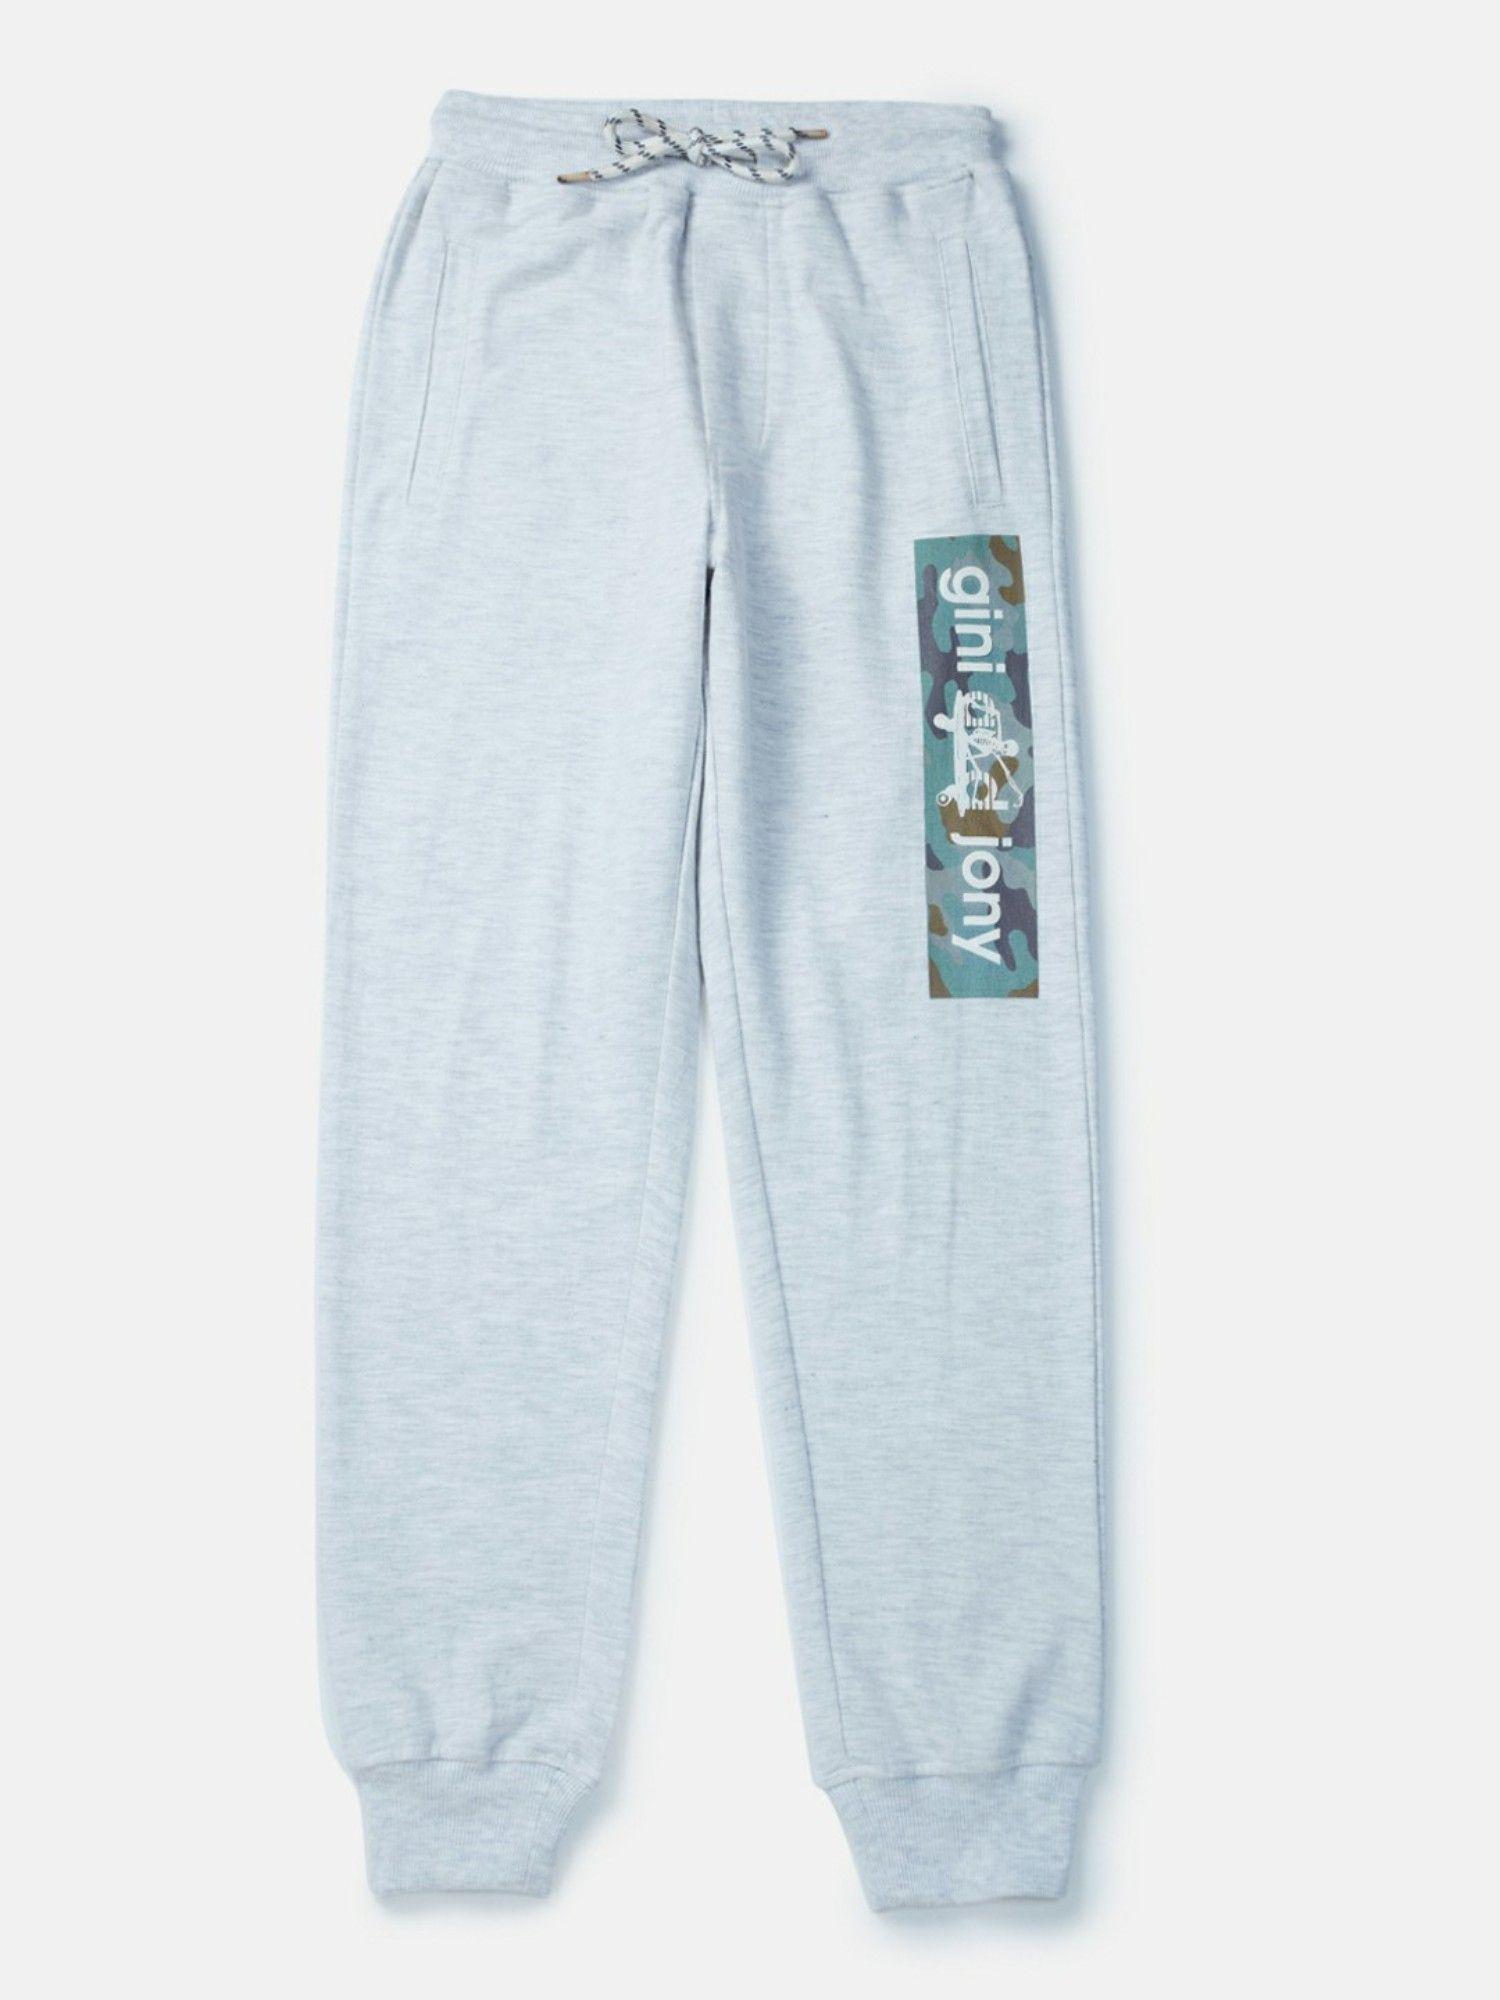 boys grey knitted graphic track pant